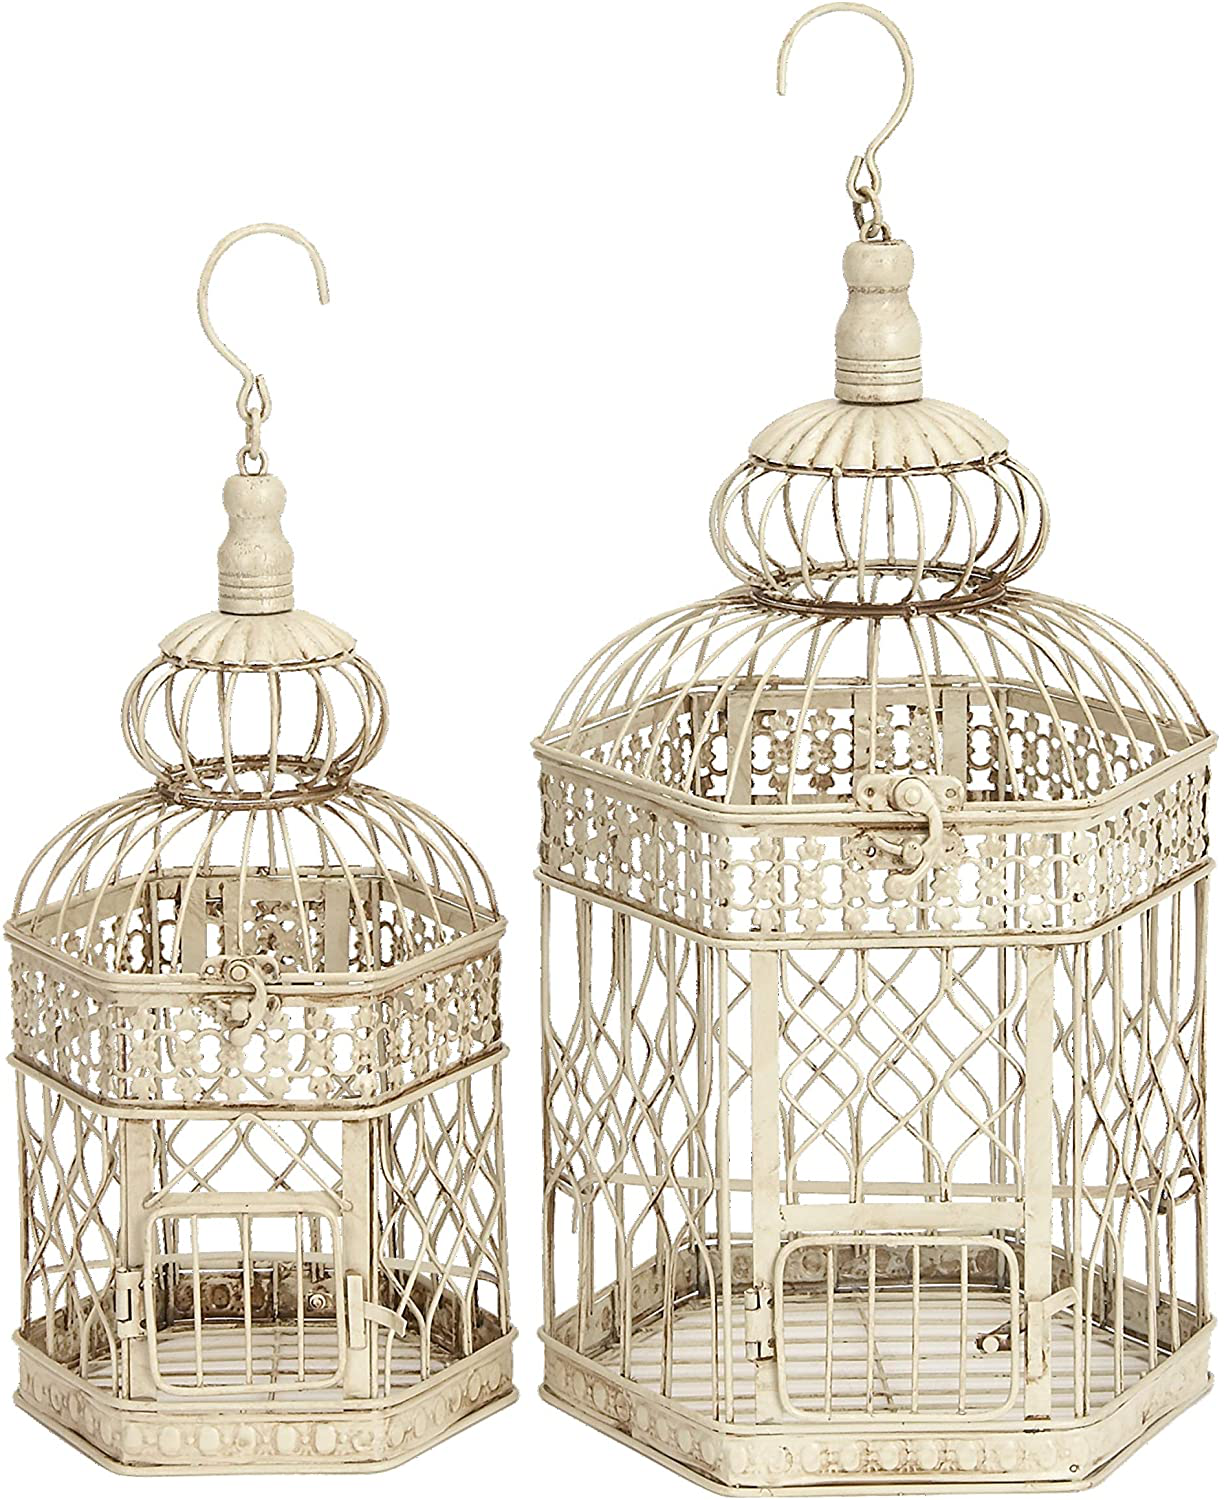 Deco 79 Metal Bird Cage, 21-Inch and 18-Inch, Set of 2 – KOL PET